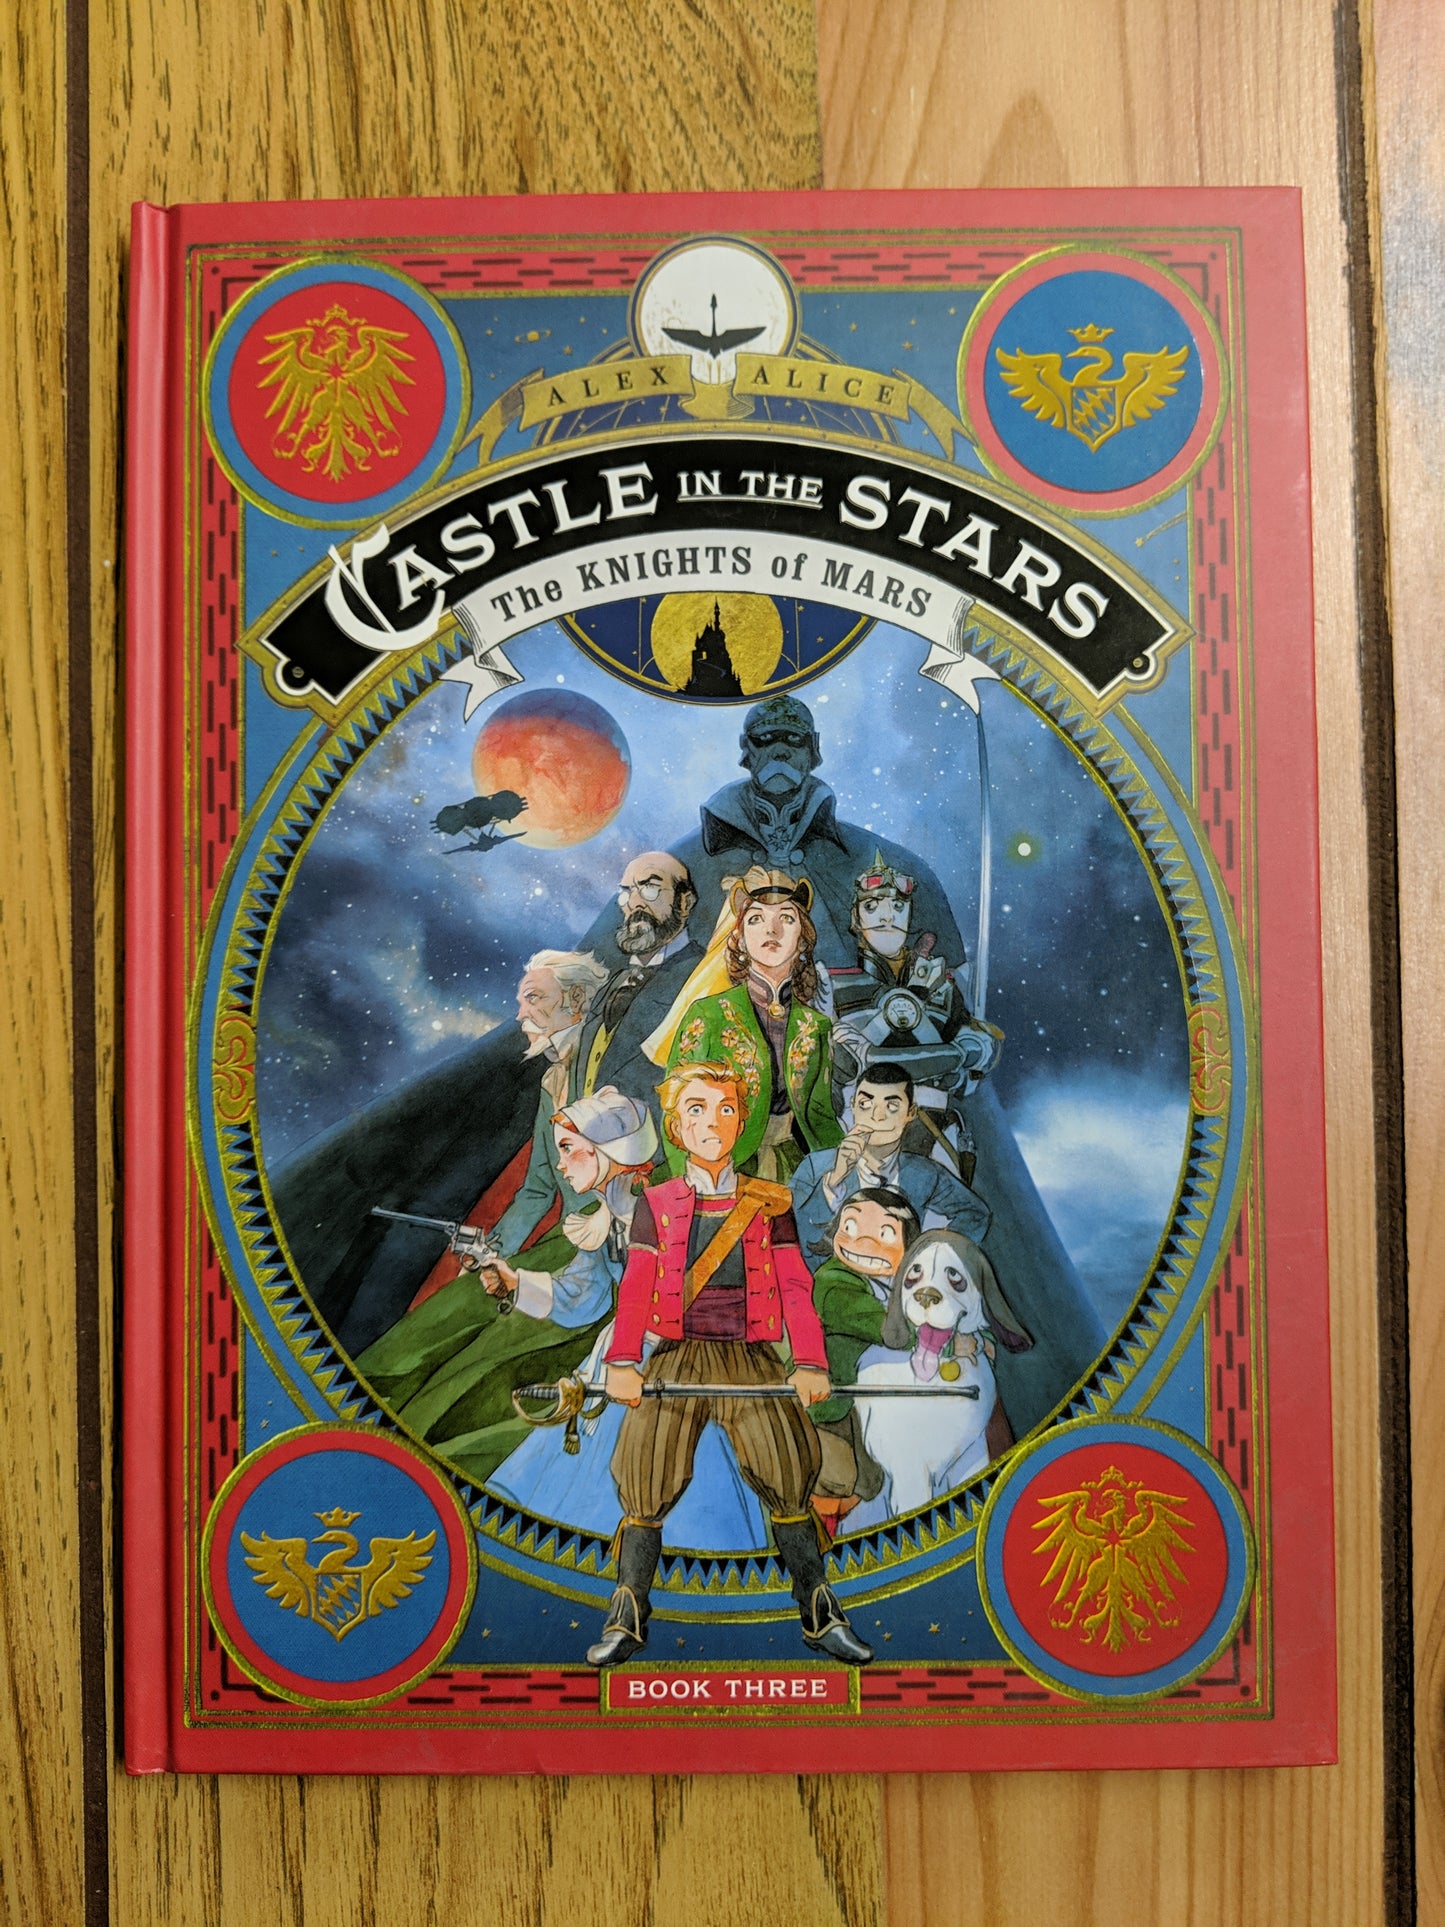 Castle in the Stars: The Knights of Mars (Vol 3)